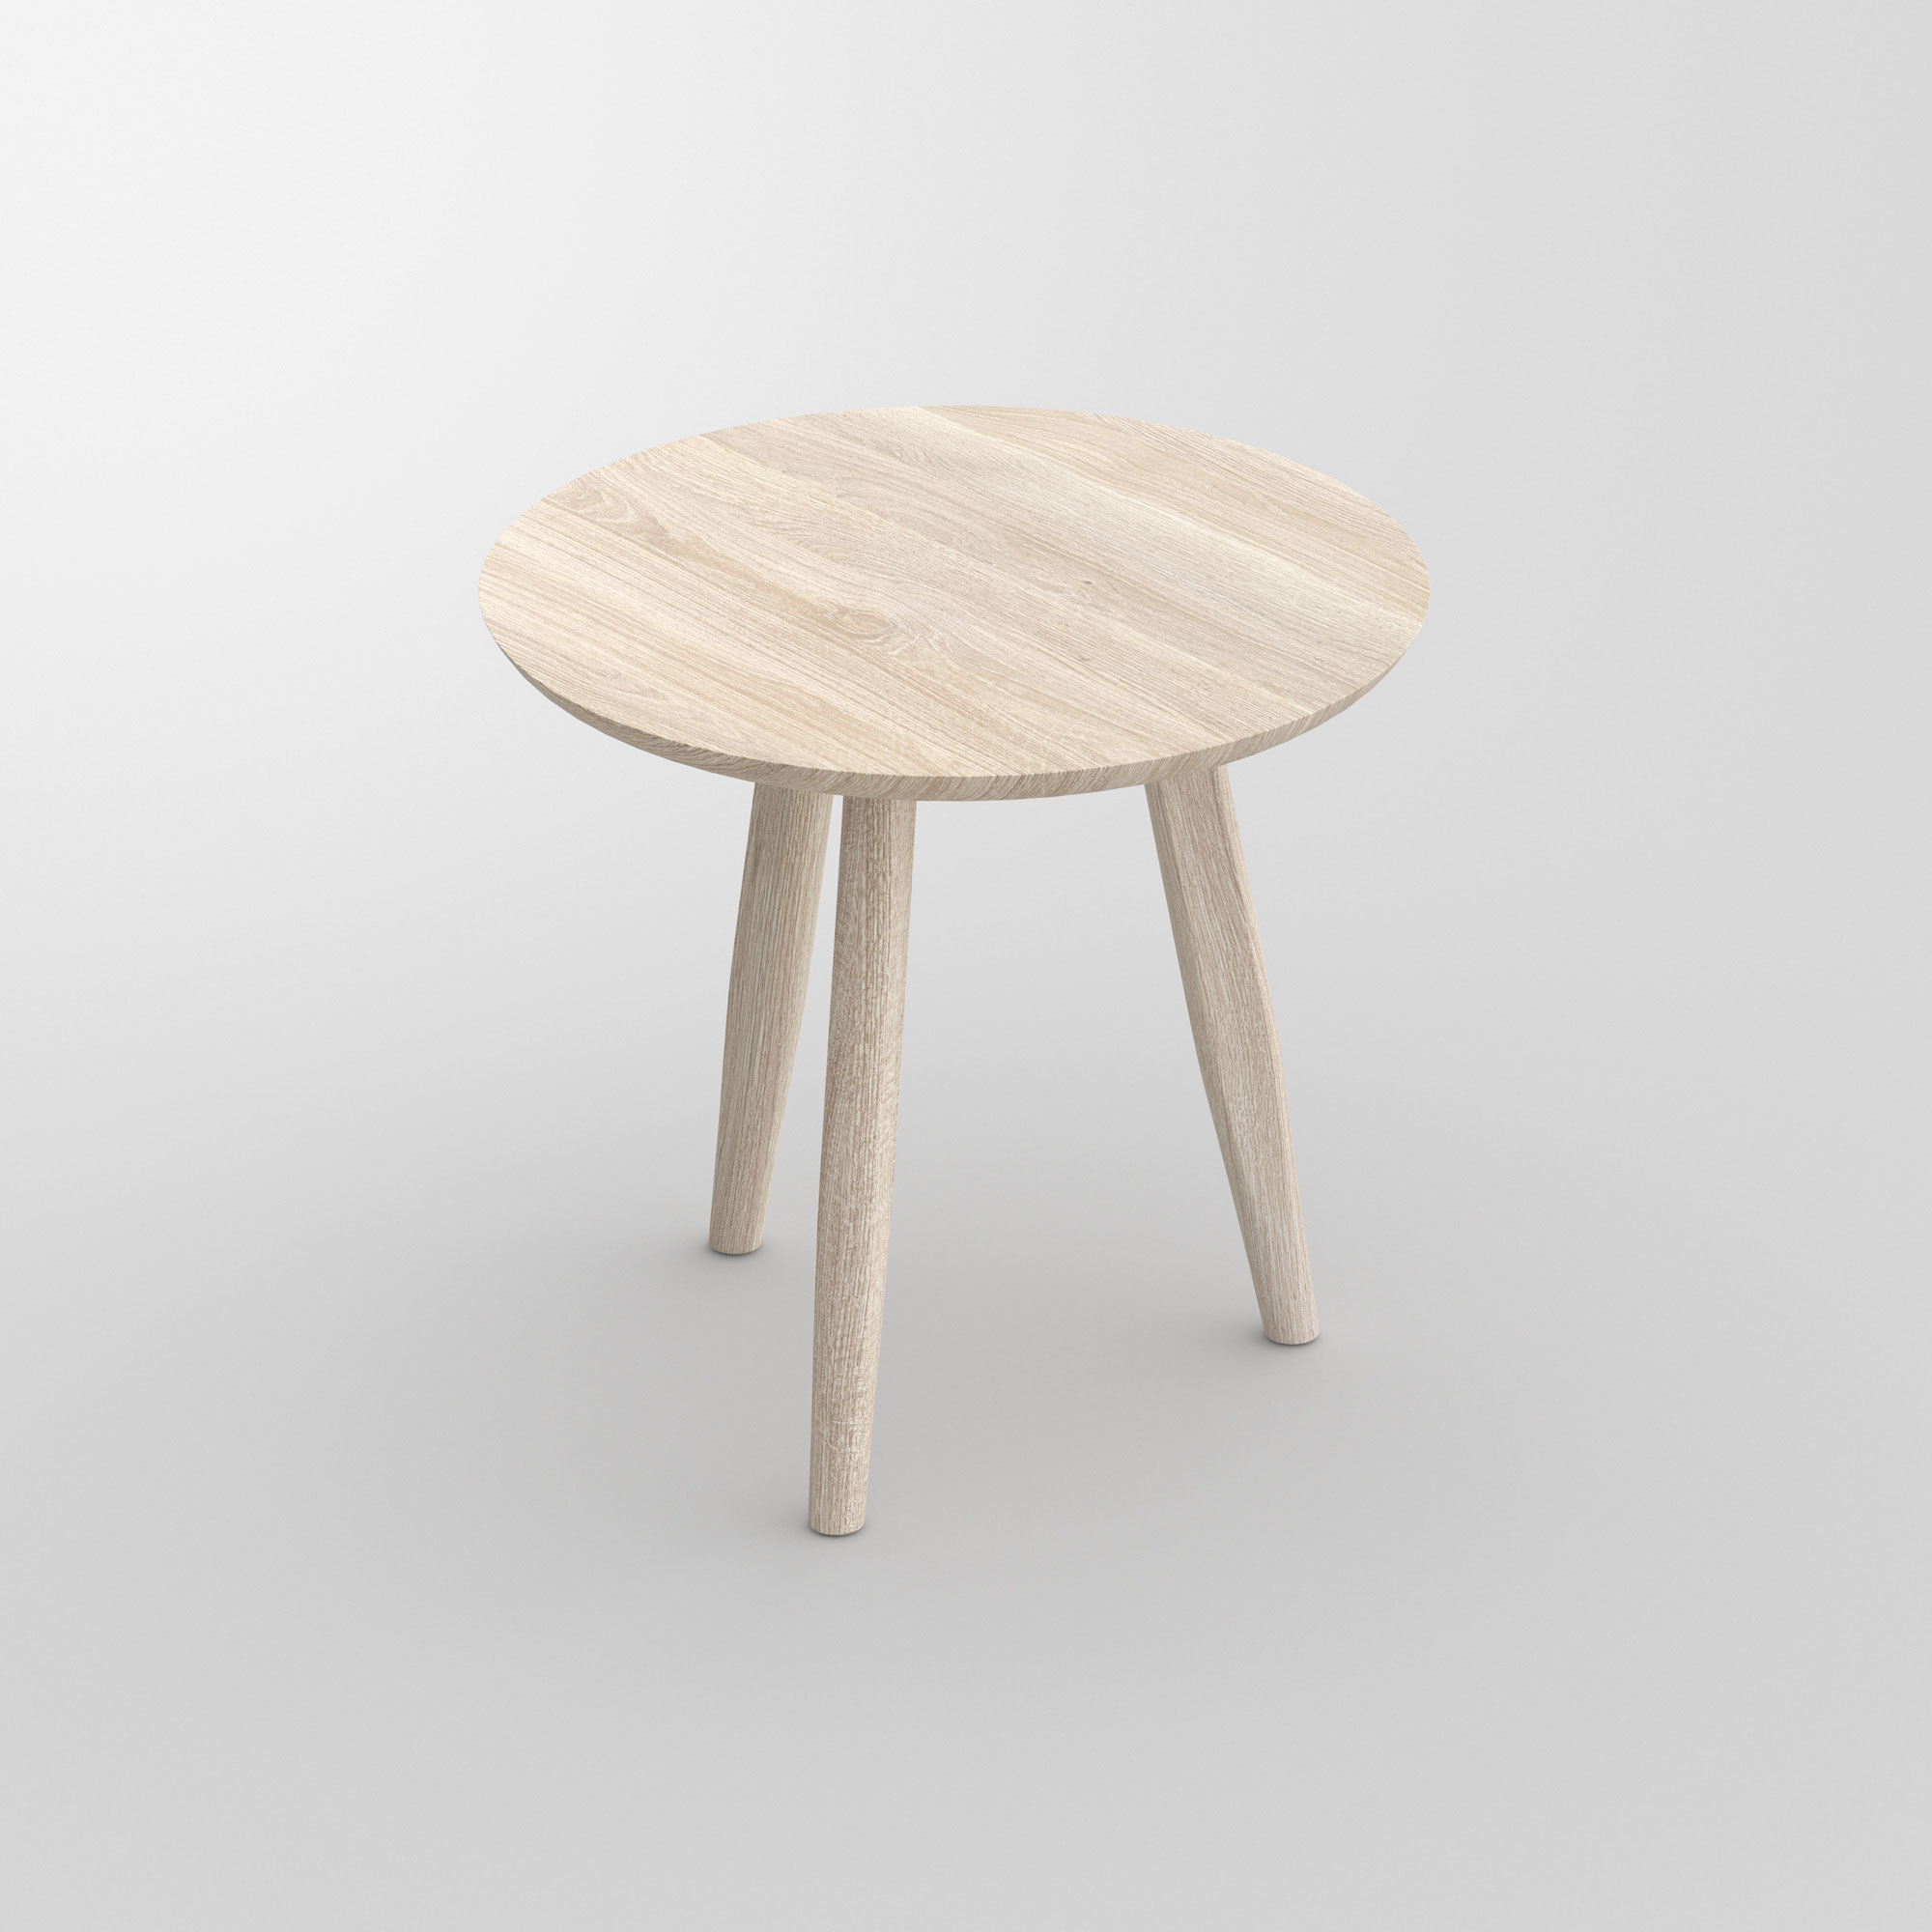 Wooden Round Coffee Table AETAS ROUND cam1 custom made in solid wood by vitamin design